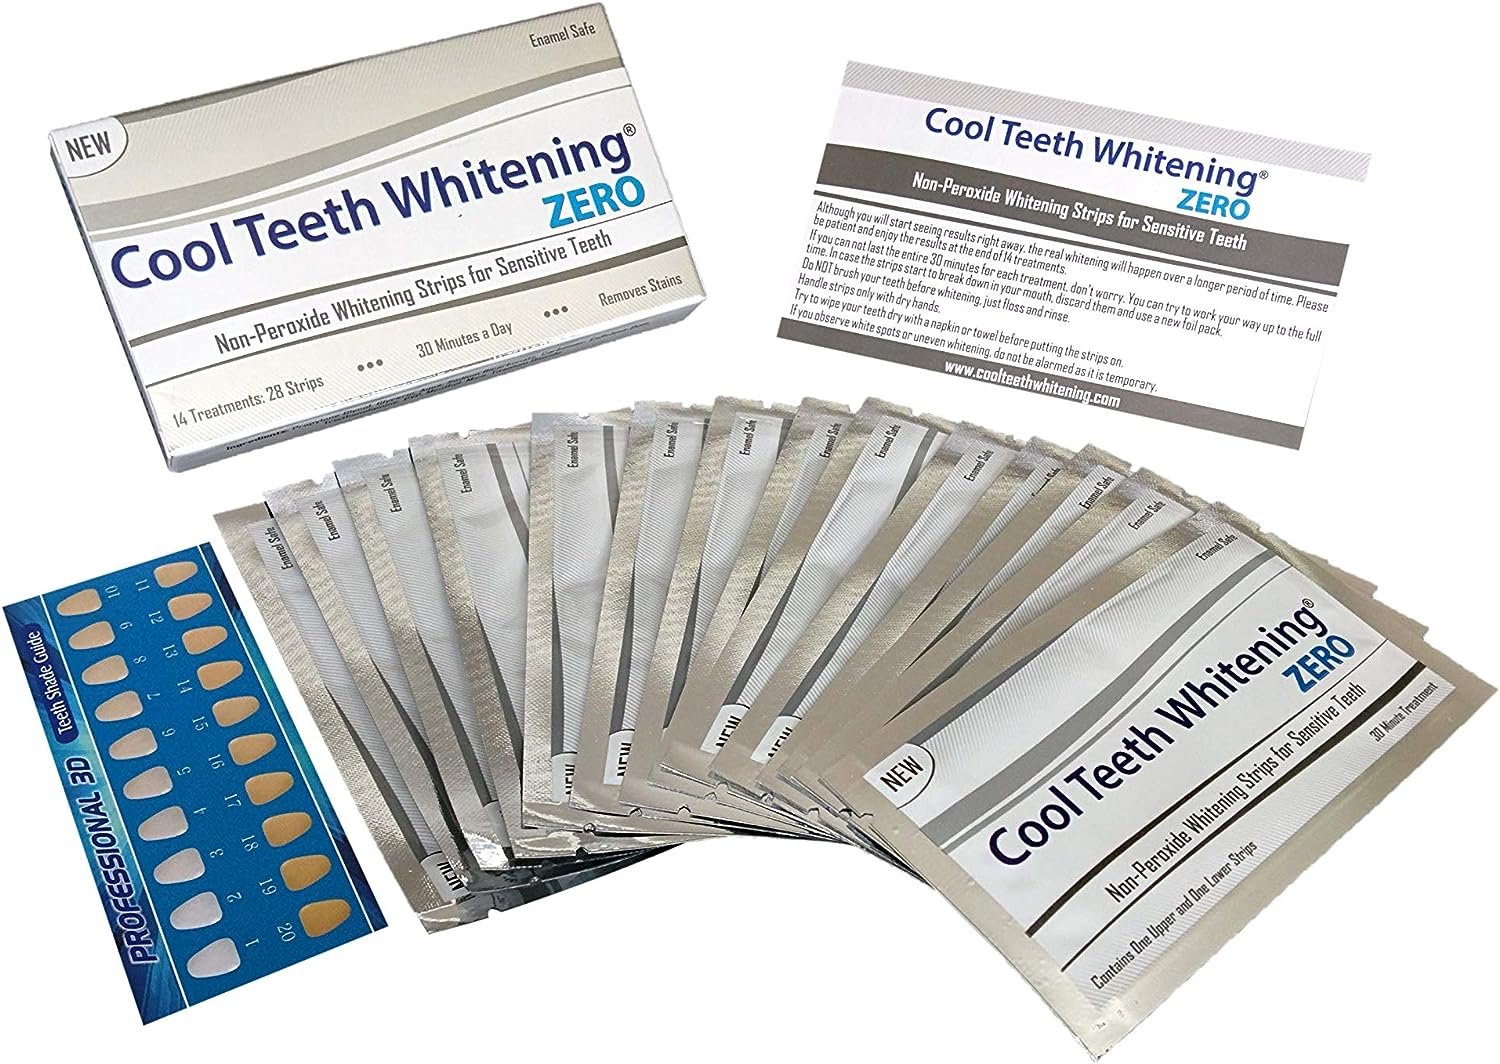 Cool Teeth Whitening Zero Peroxide Strips for Sensitive Teeth and Gums Whitener Band Kit 28 Pcs 14 Treatments 2 Week Supply Color Chart Gentle No Hp Bleach Free Instant White Tooth Non Slip Formula